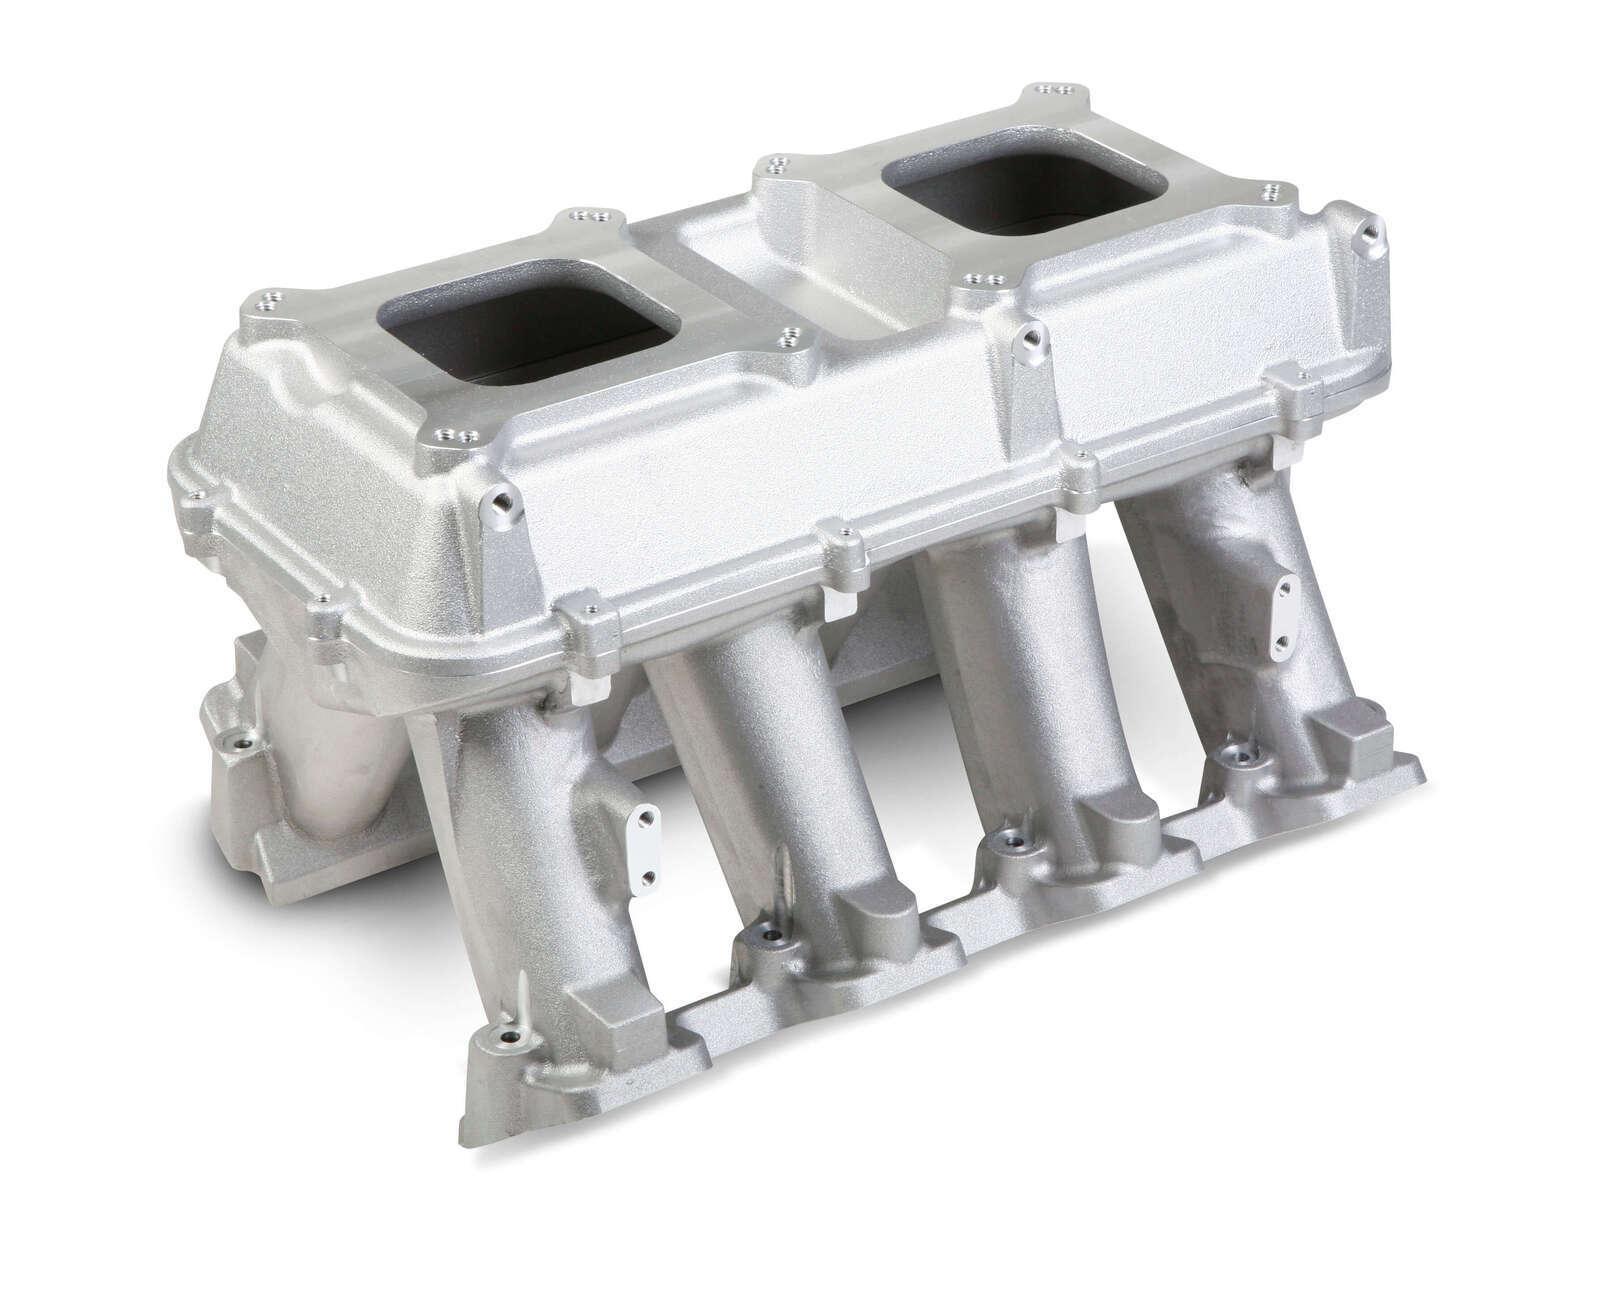 Holley Intake Manifold Carb Hi-Ram 11.08/11.08 in. Height 7000-8000 RPM GM LS3/L92 Satin HY300113